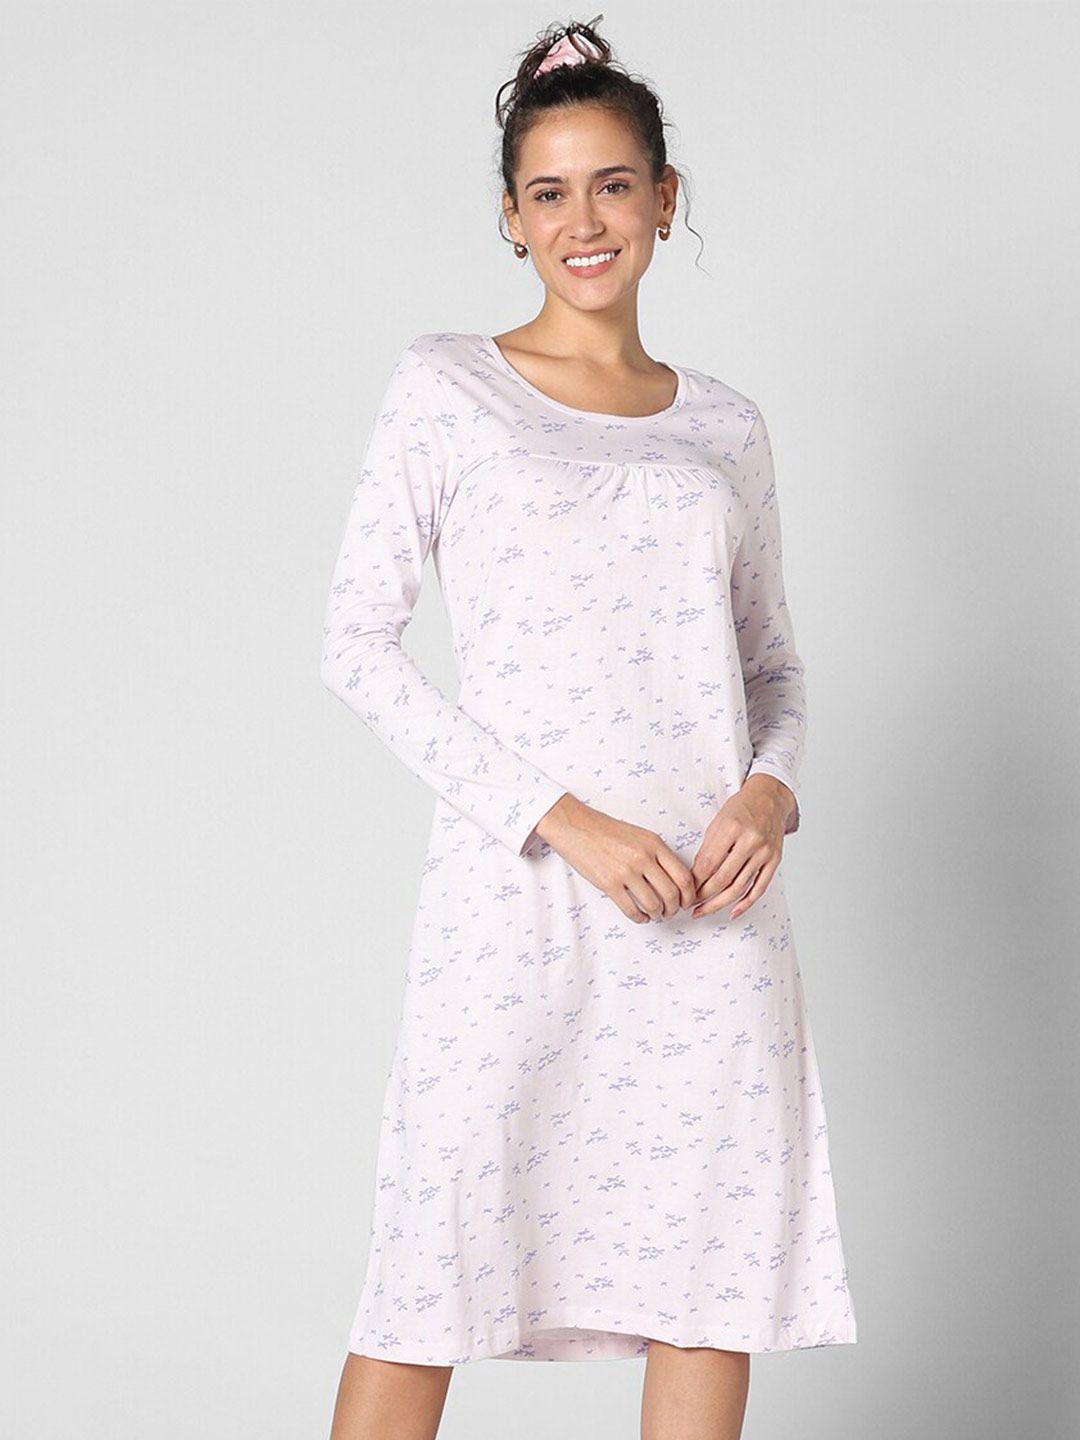 dreamz by pantaloons floral printed pure cotton t-shirt nightdress